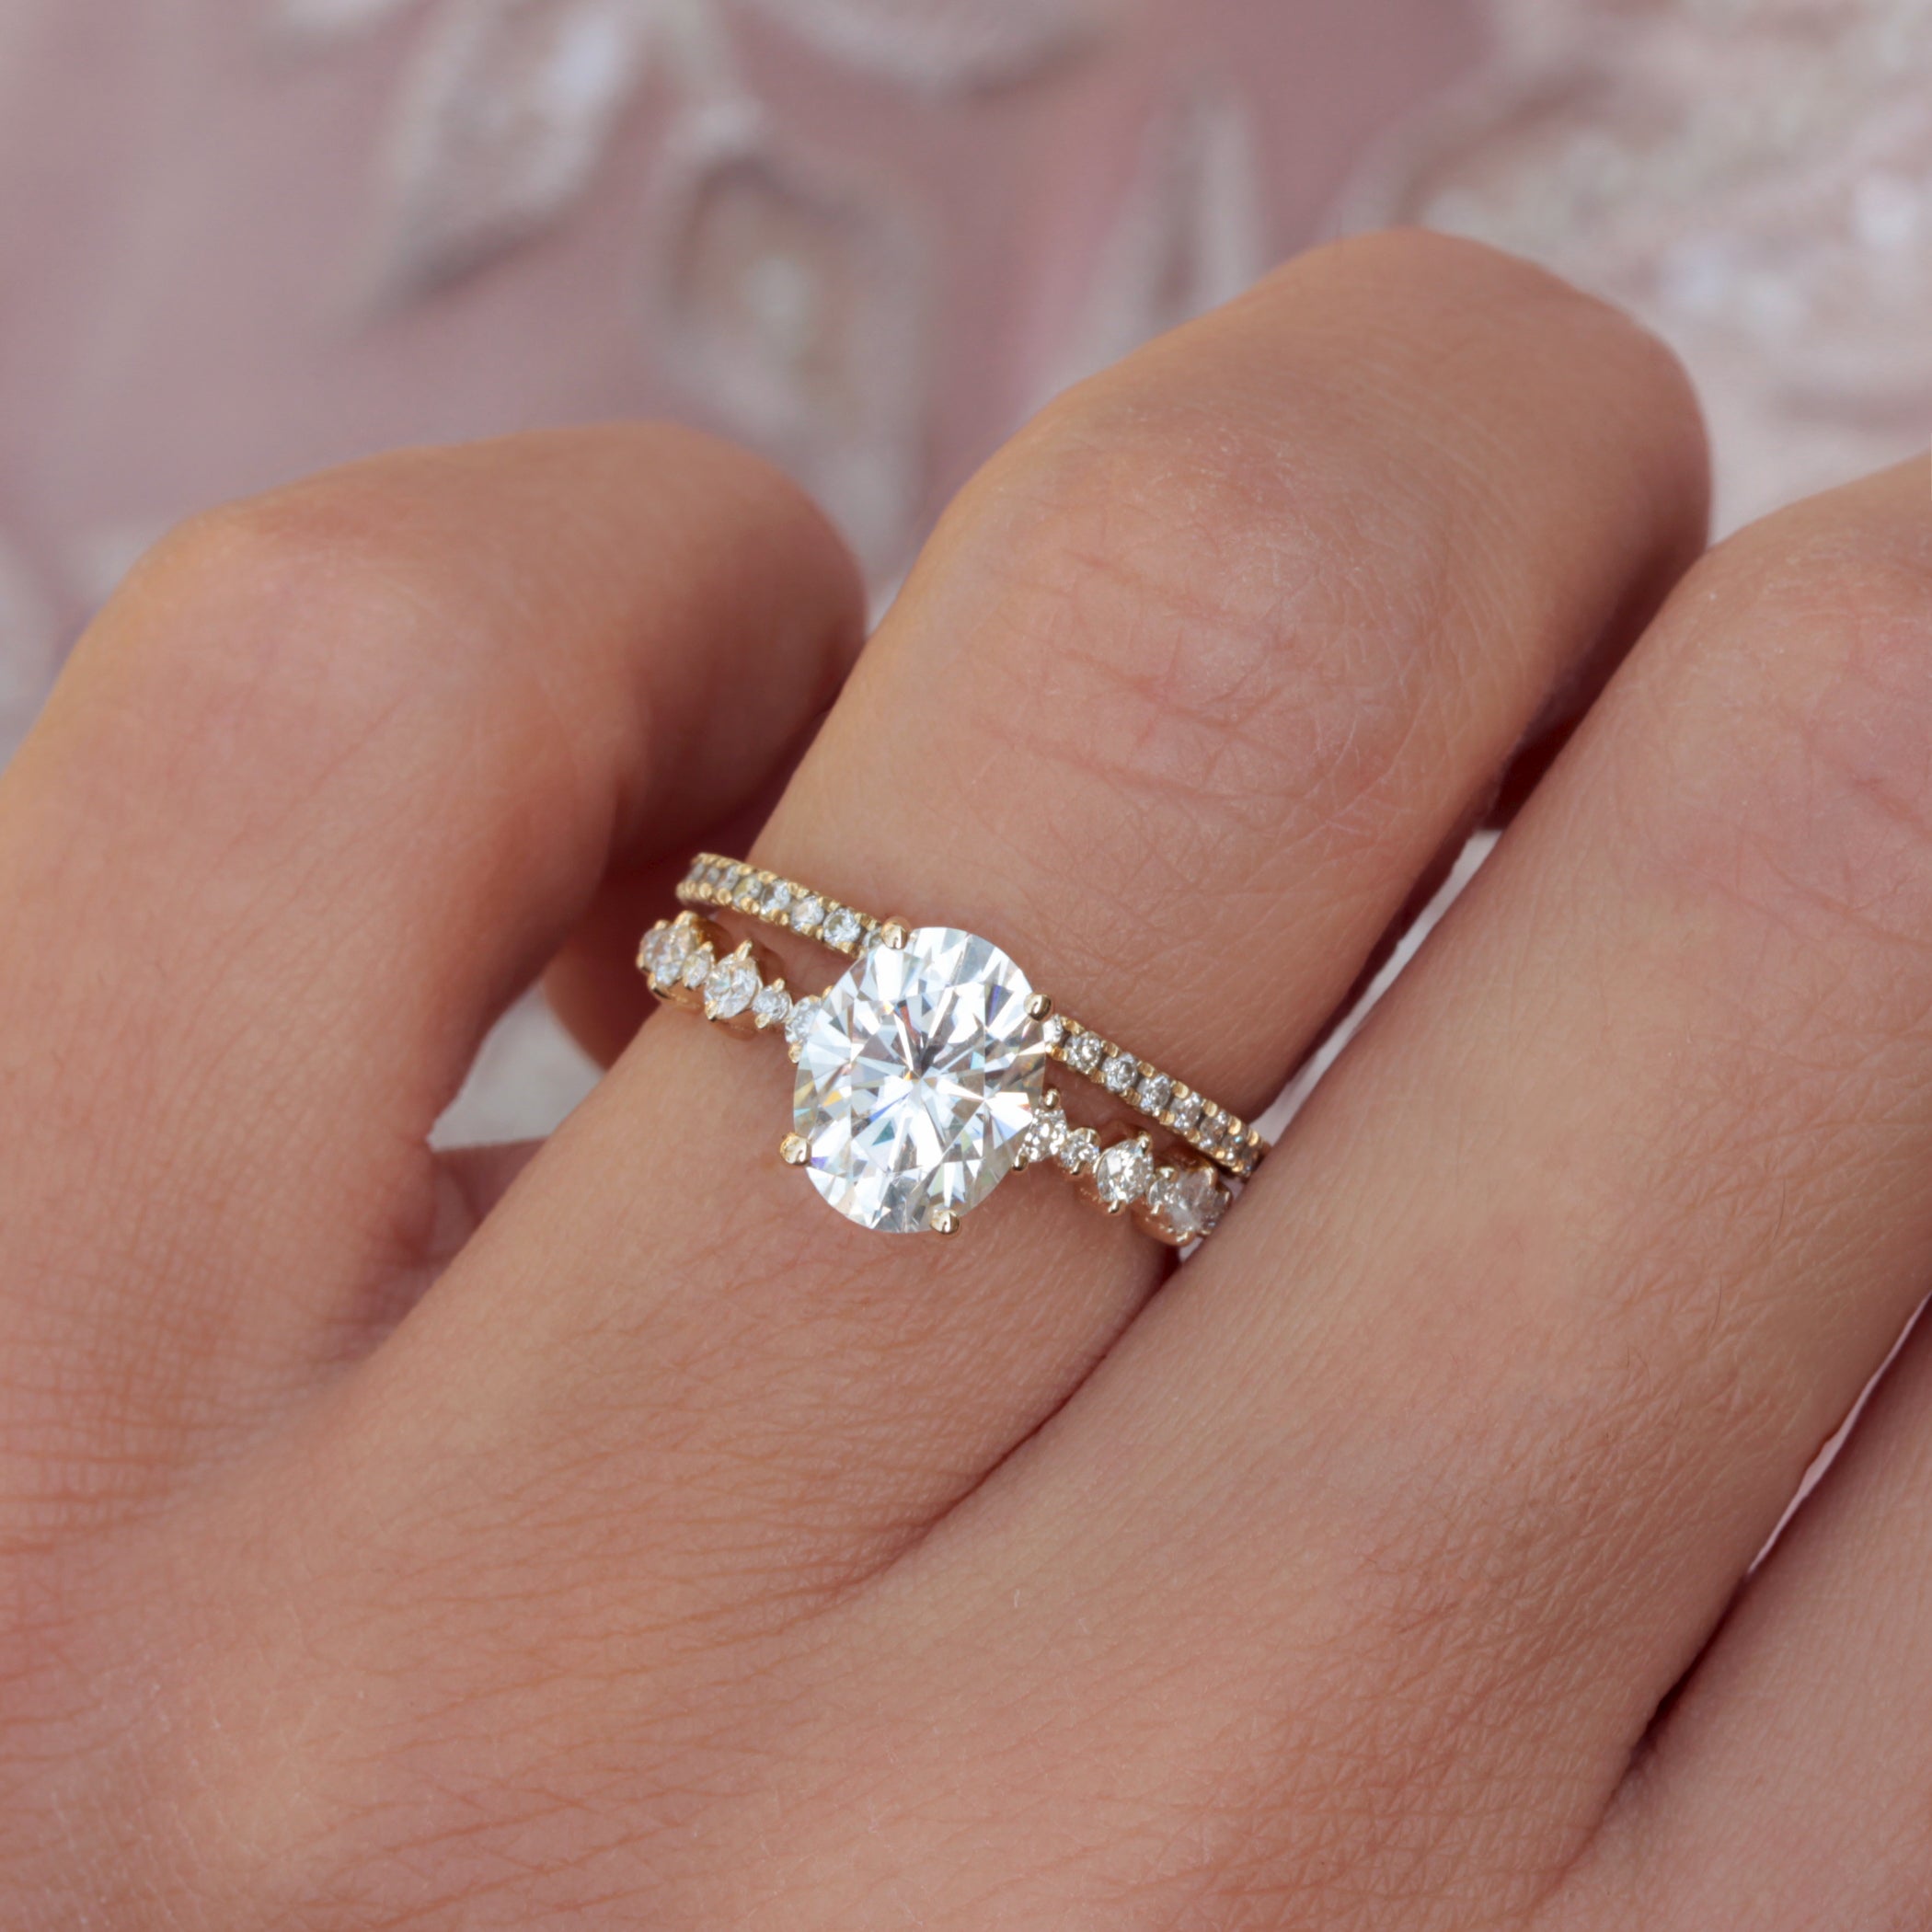 Oval Moissanite Classic Engagement Ring with Diamond Band - Margo - 14K Yellow Gold, size 6 - READY TO SHIP!